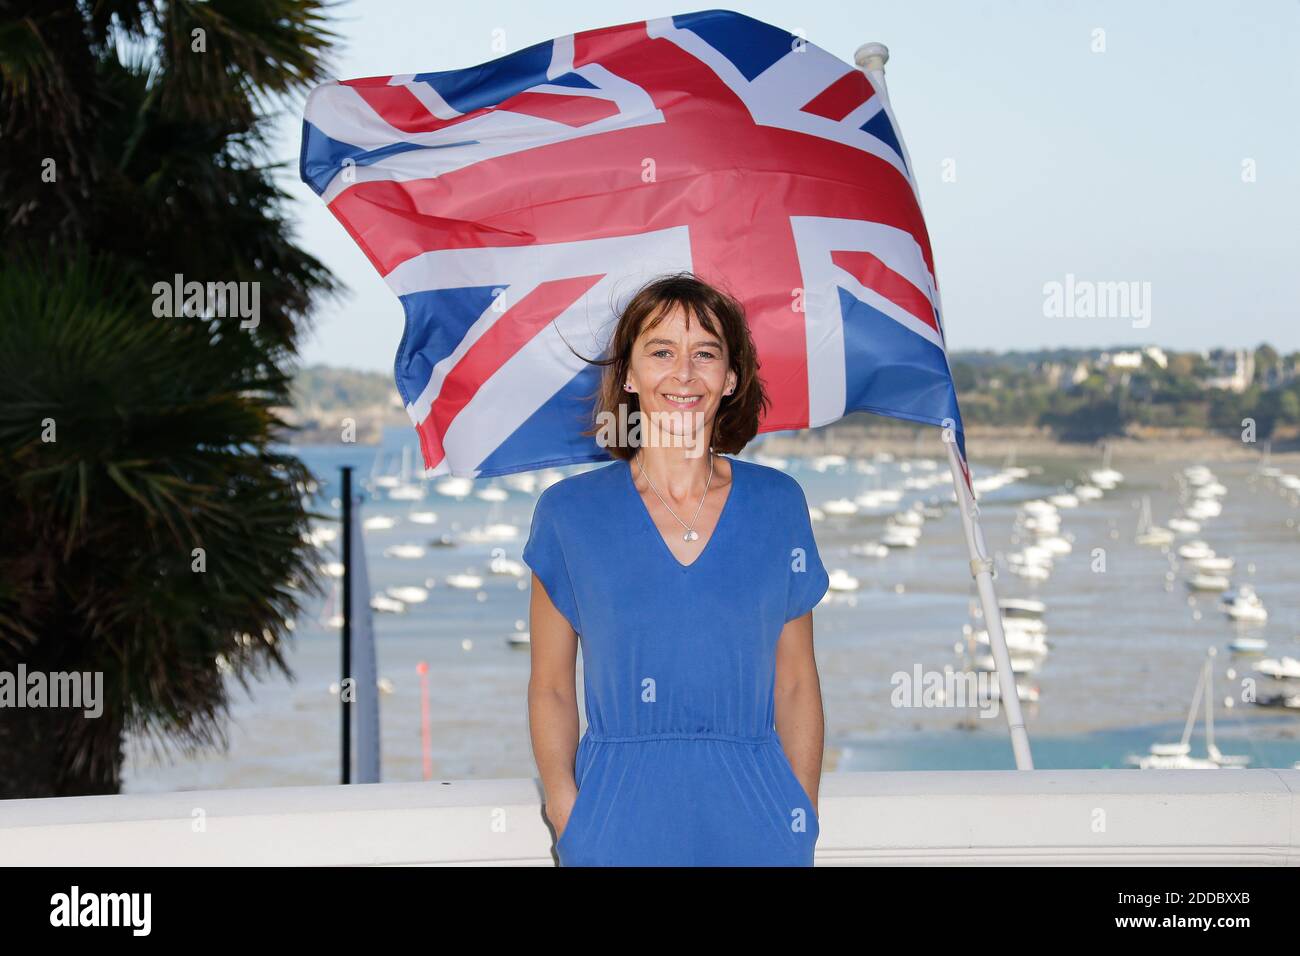 Kate Dickie during the 29th edition of Dinard Film Festival on September 28, 2018 in Dinard, France. Photo by Thibaud MORITZ ABACAPRESS.COM Stock Photo